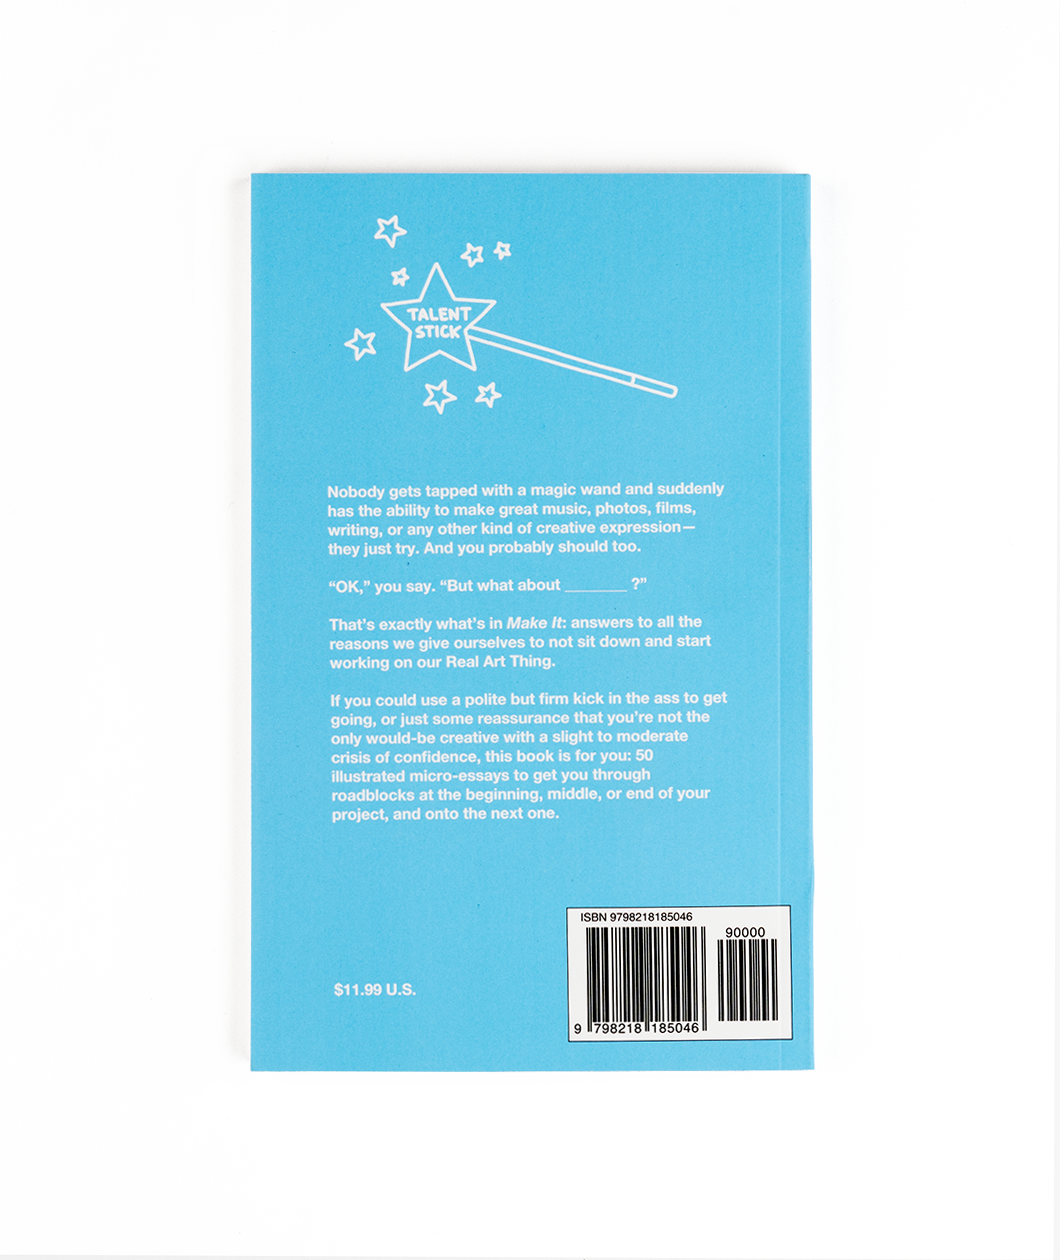 The back of the book is light blue with small text and a magic wand that says "Talent Stick". From Semi Rad. 